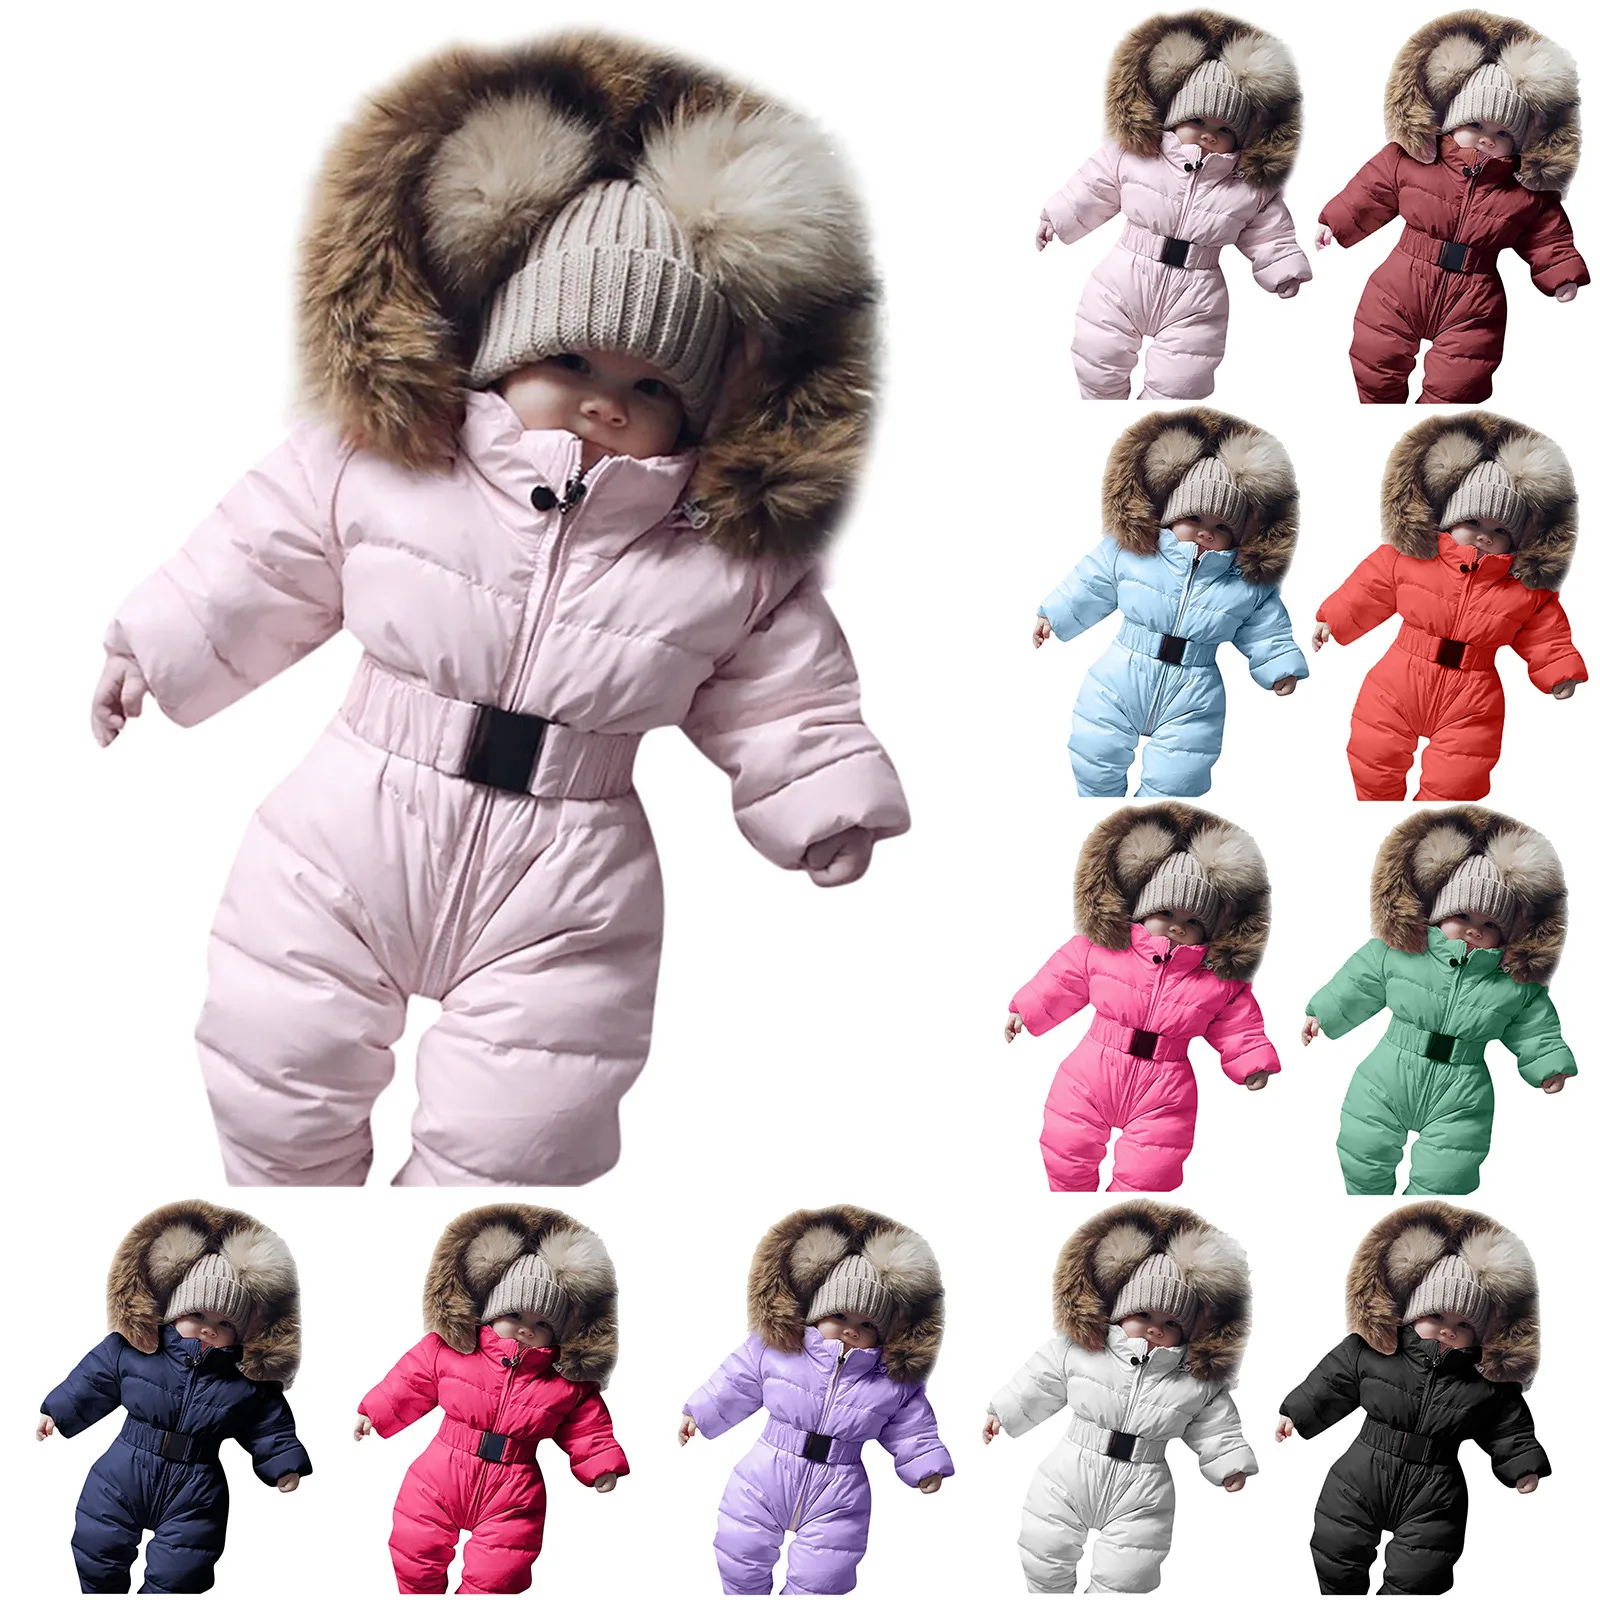 6-9 Months, Black Sameno Infant Toddler Baby Girls Boys Winter Down Snowsuits Romper Jacket Hooded Jumpsuit Warm Thick Coat Outfit 